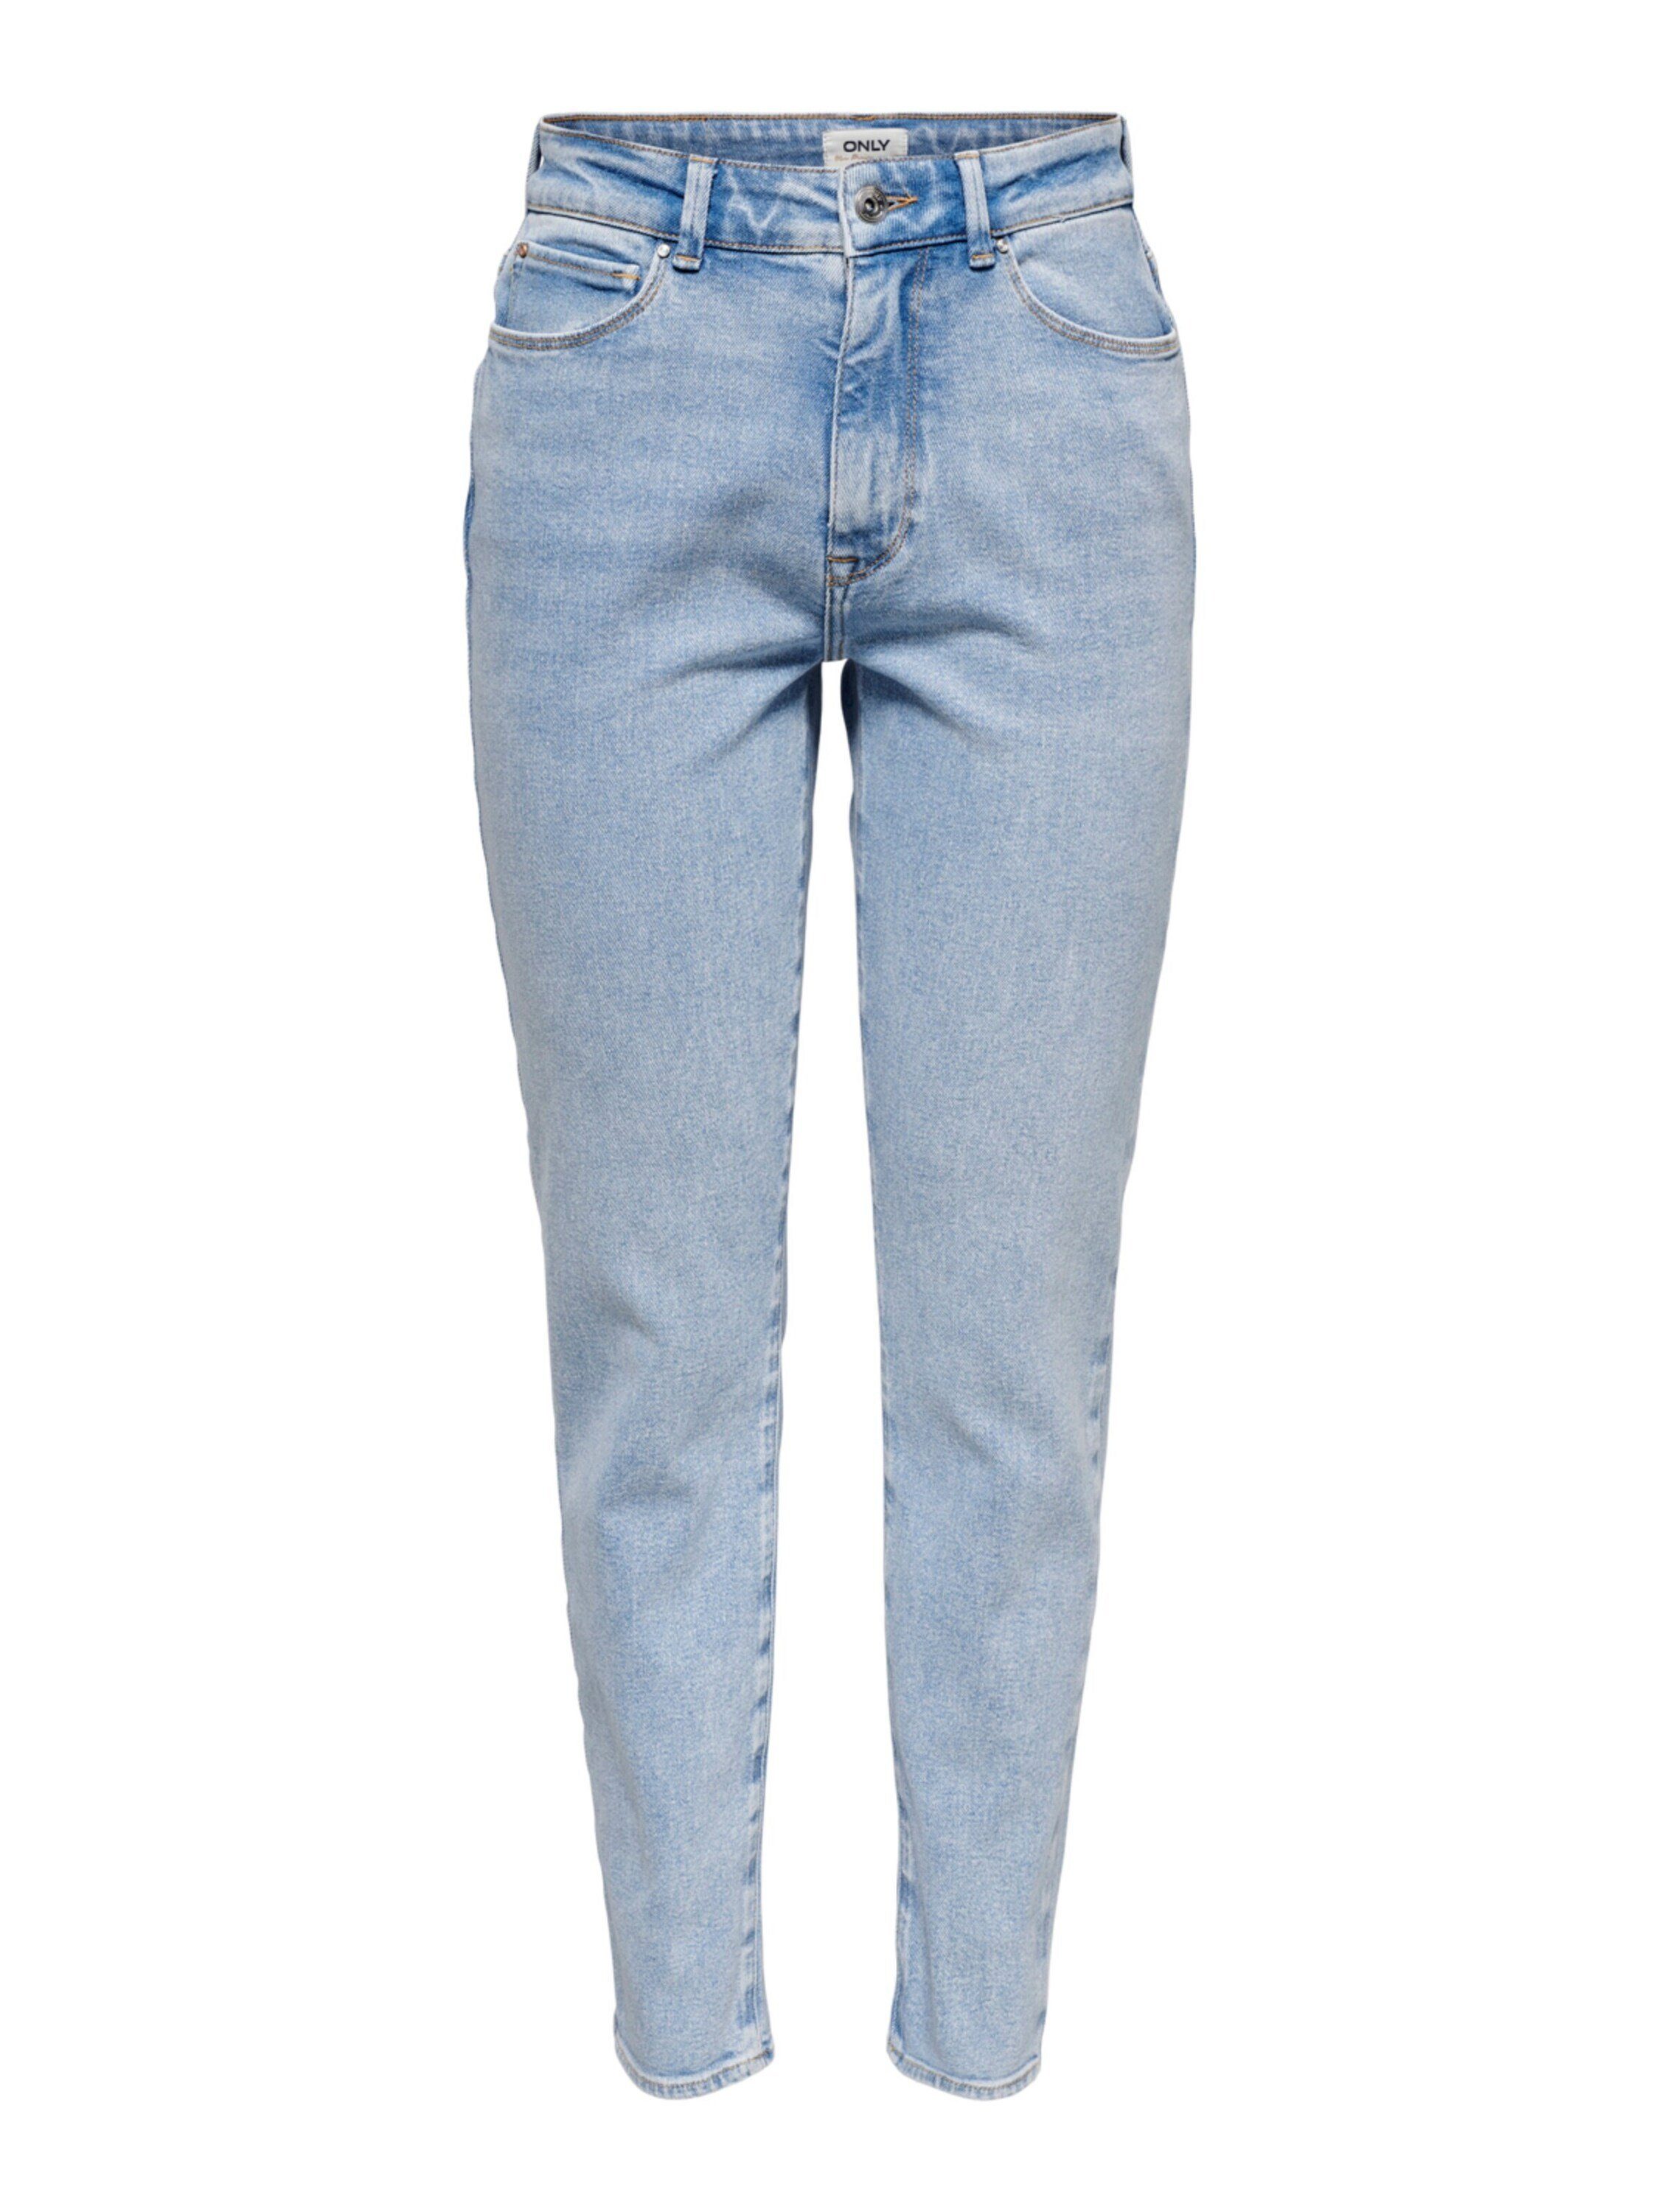 Cut-Outs, 7/8-Jeans Abgesteppter Fransen, (1-tlg) Emily Detail, Saum/Kante Weiteres Details, ONLY Plain/ohne